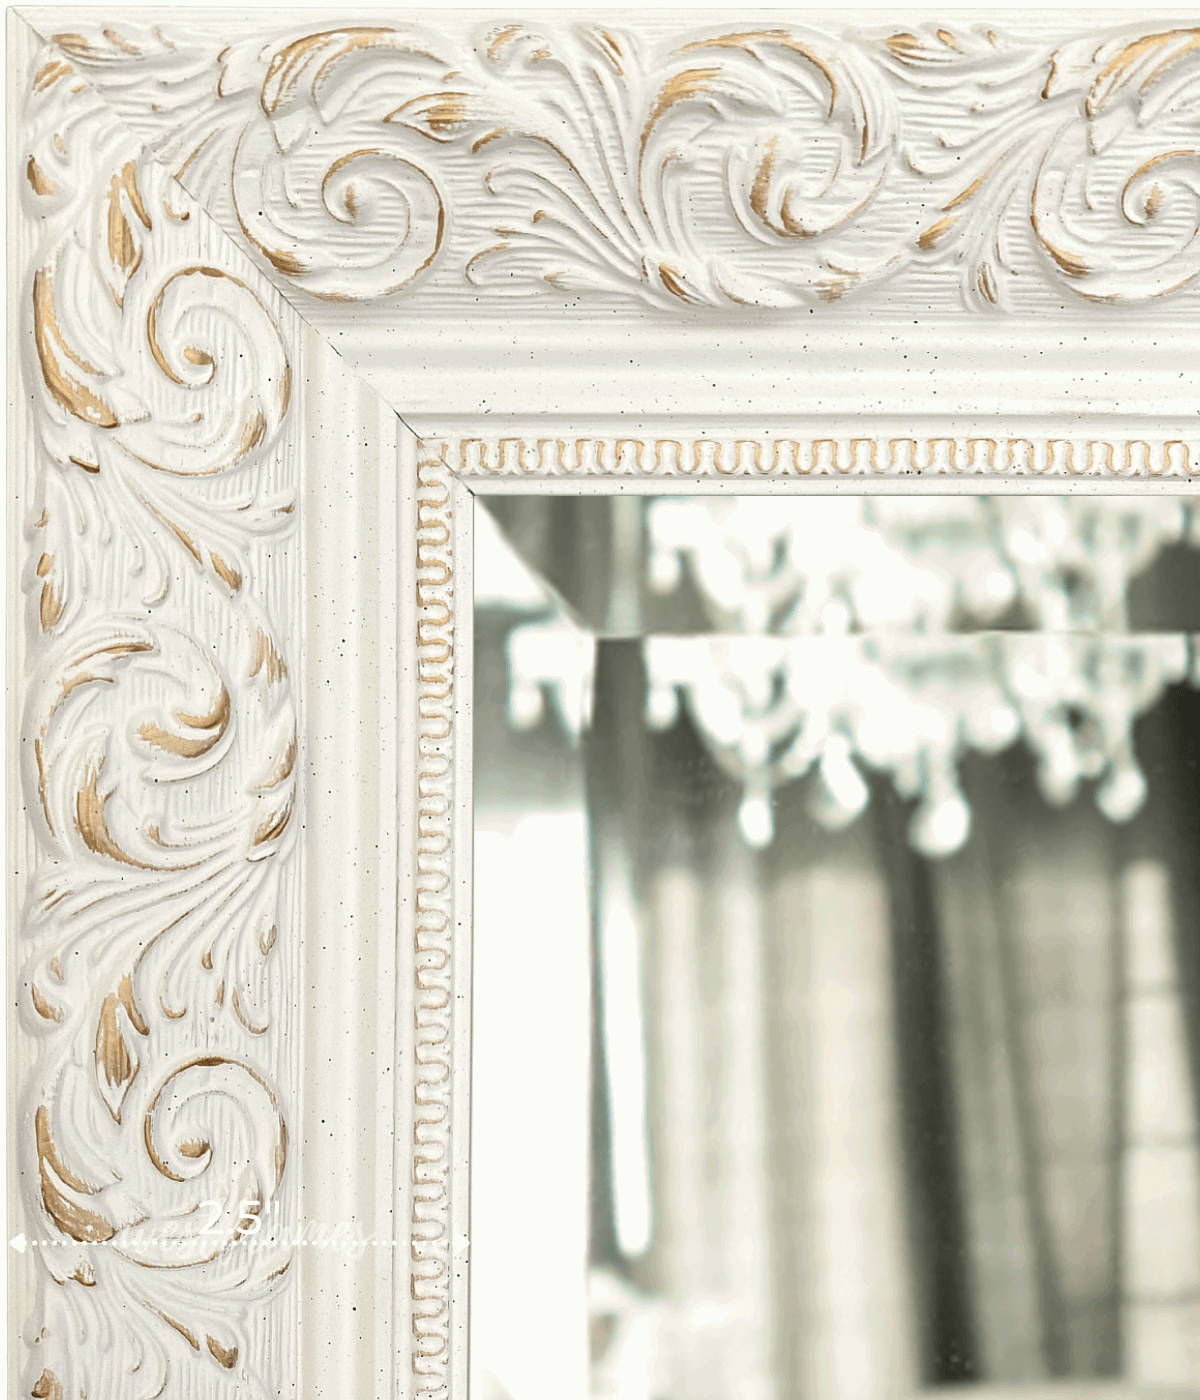 Bella French Ornate Embossed Framed Wall Mirror Antique White - West Frames